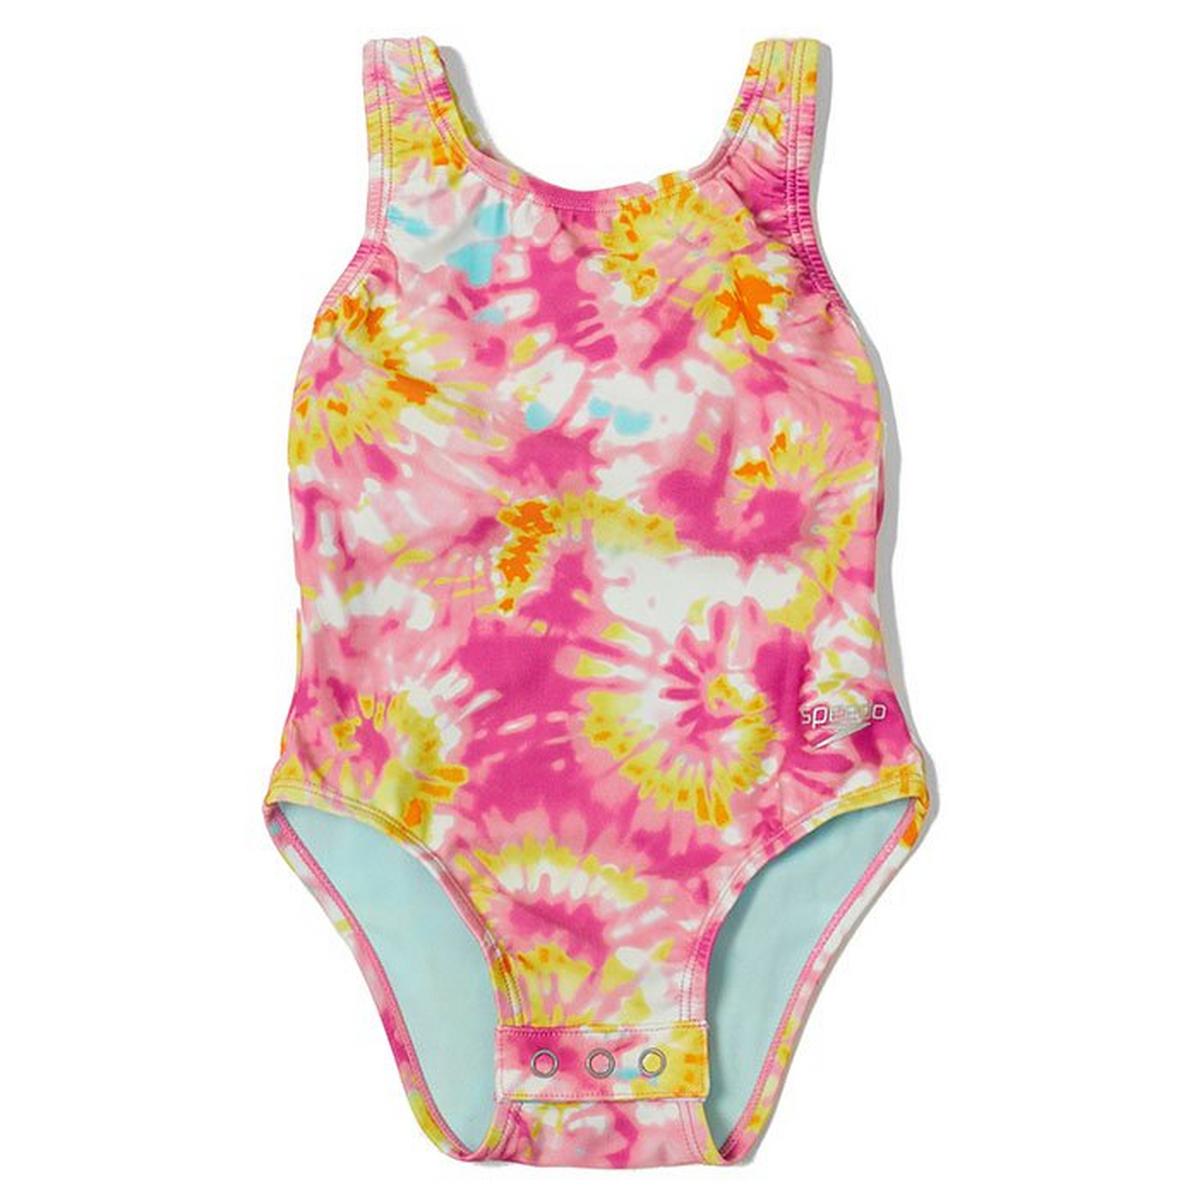 Girls' [9M-3Y] Printed One-Piece Snapsuit